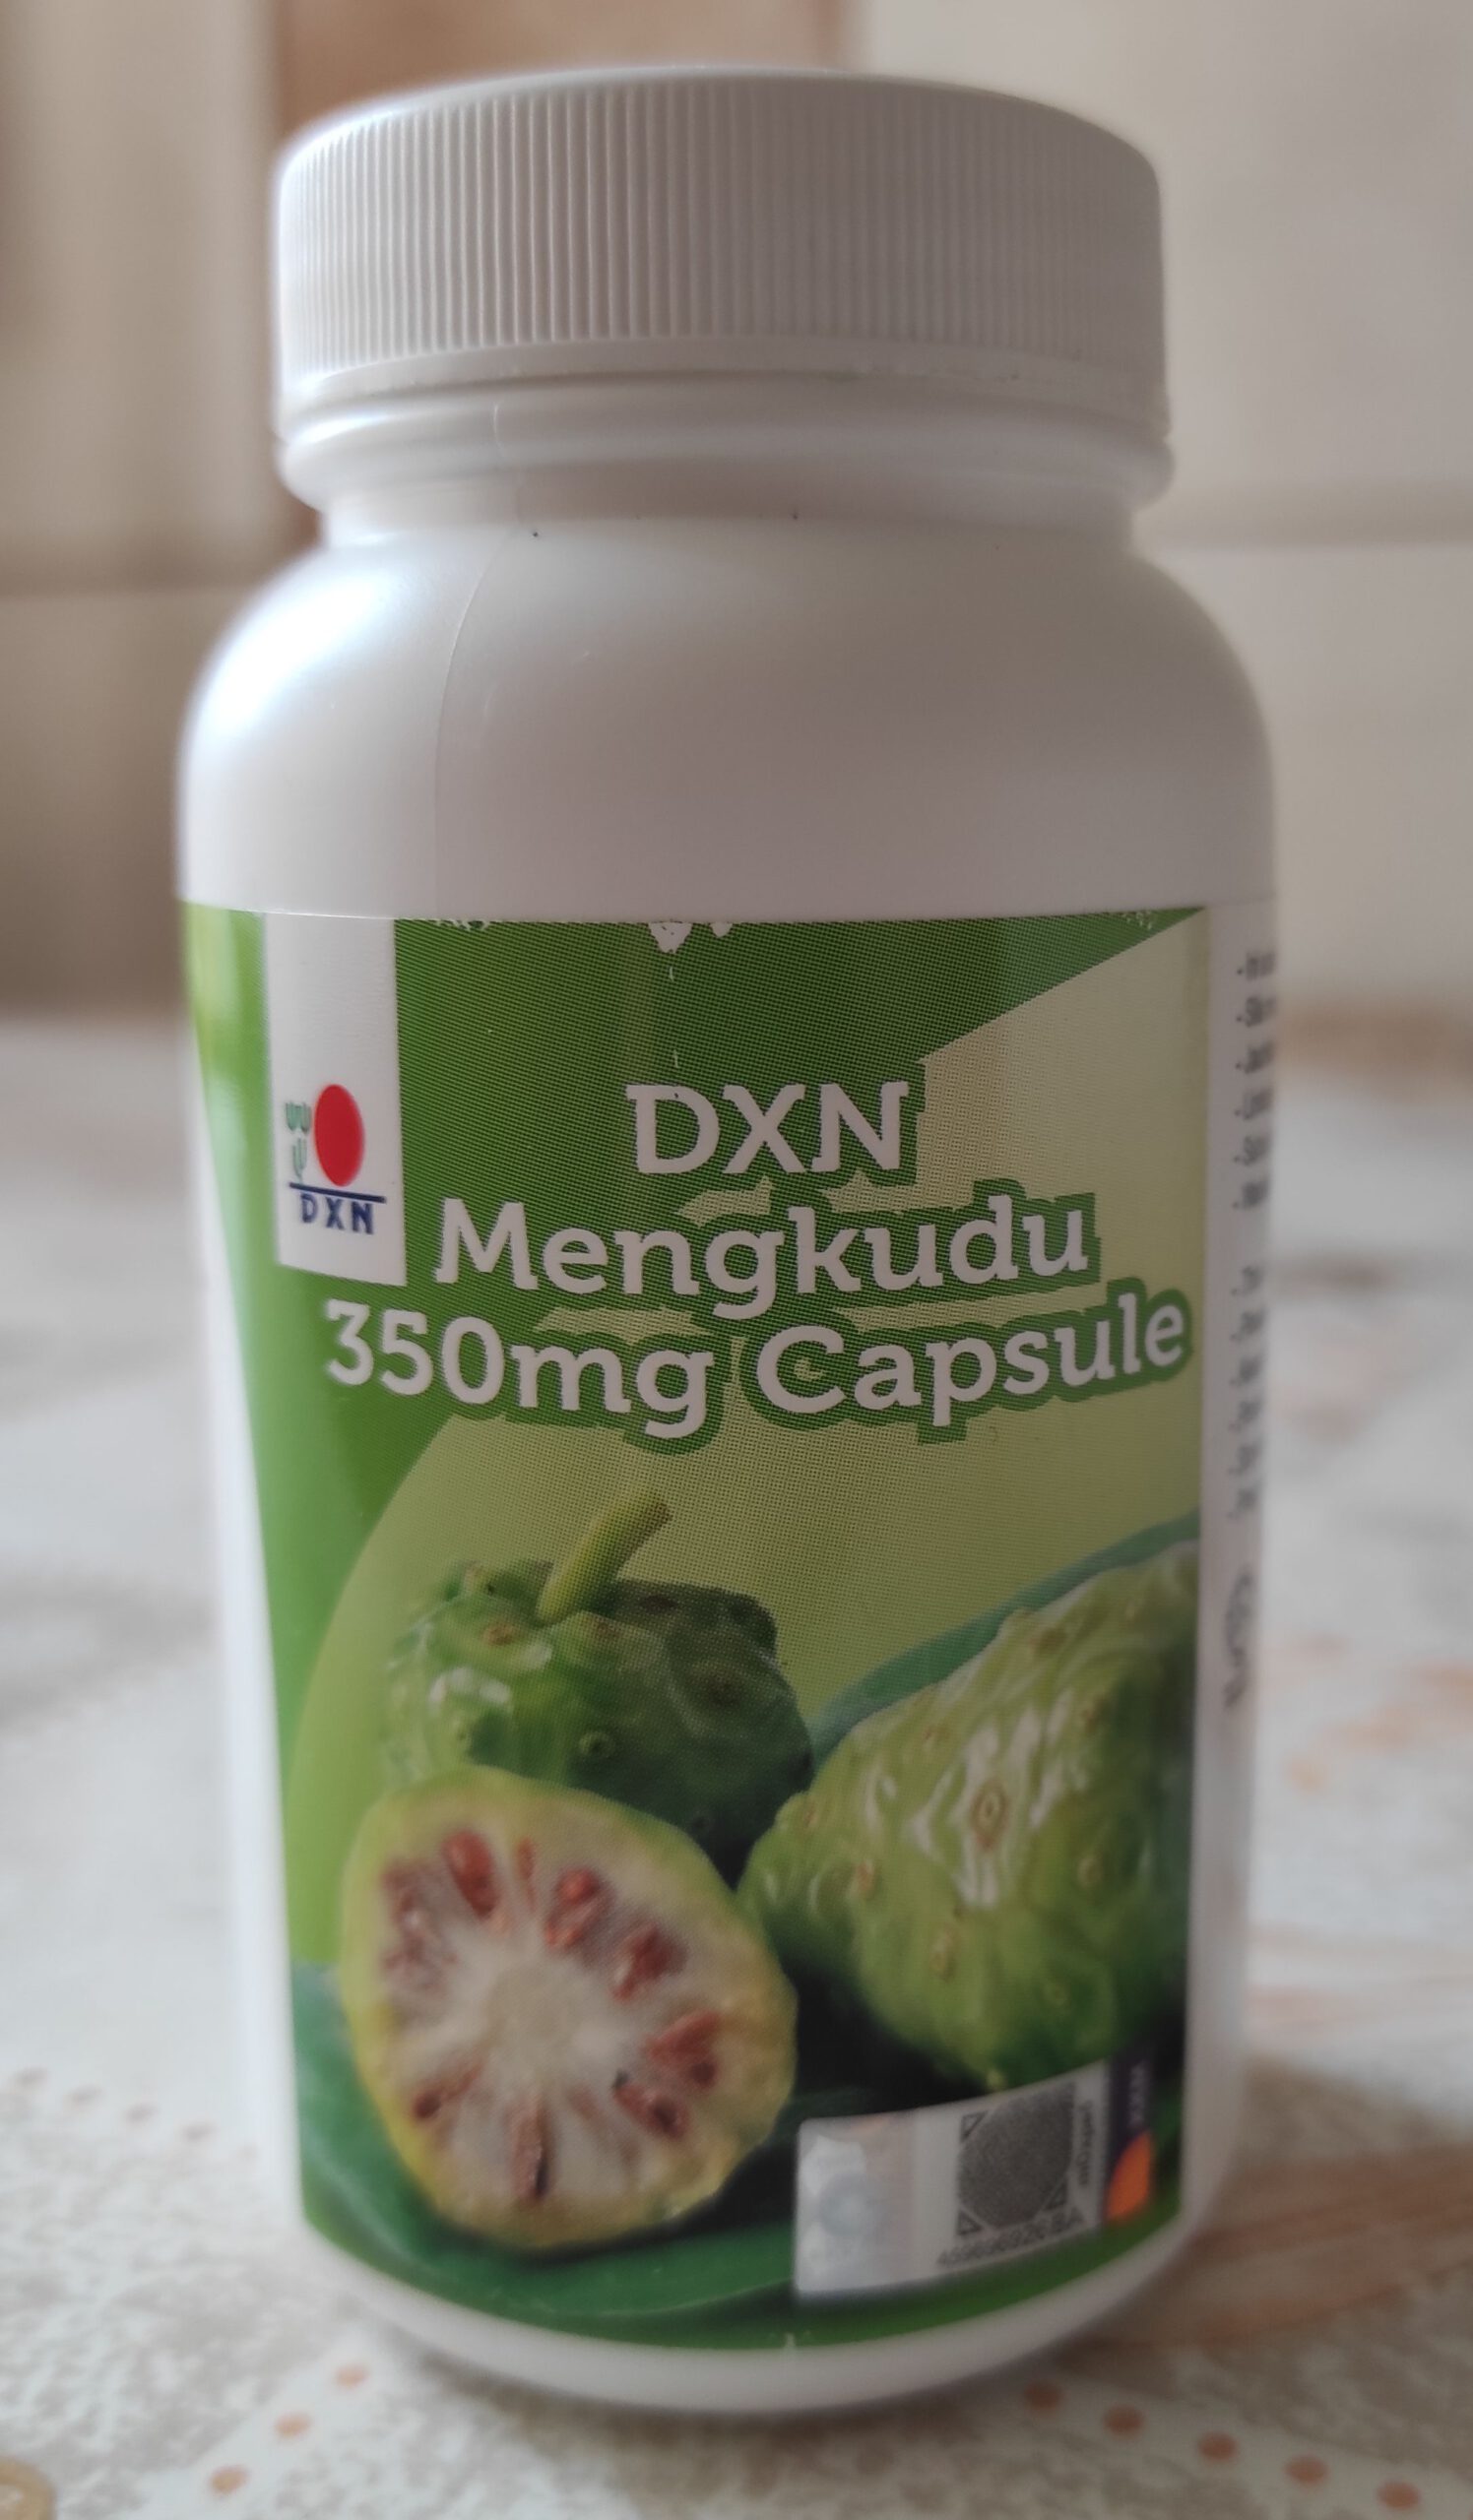 Noni capsules from DXN Holdings Berhad